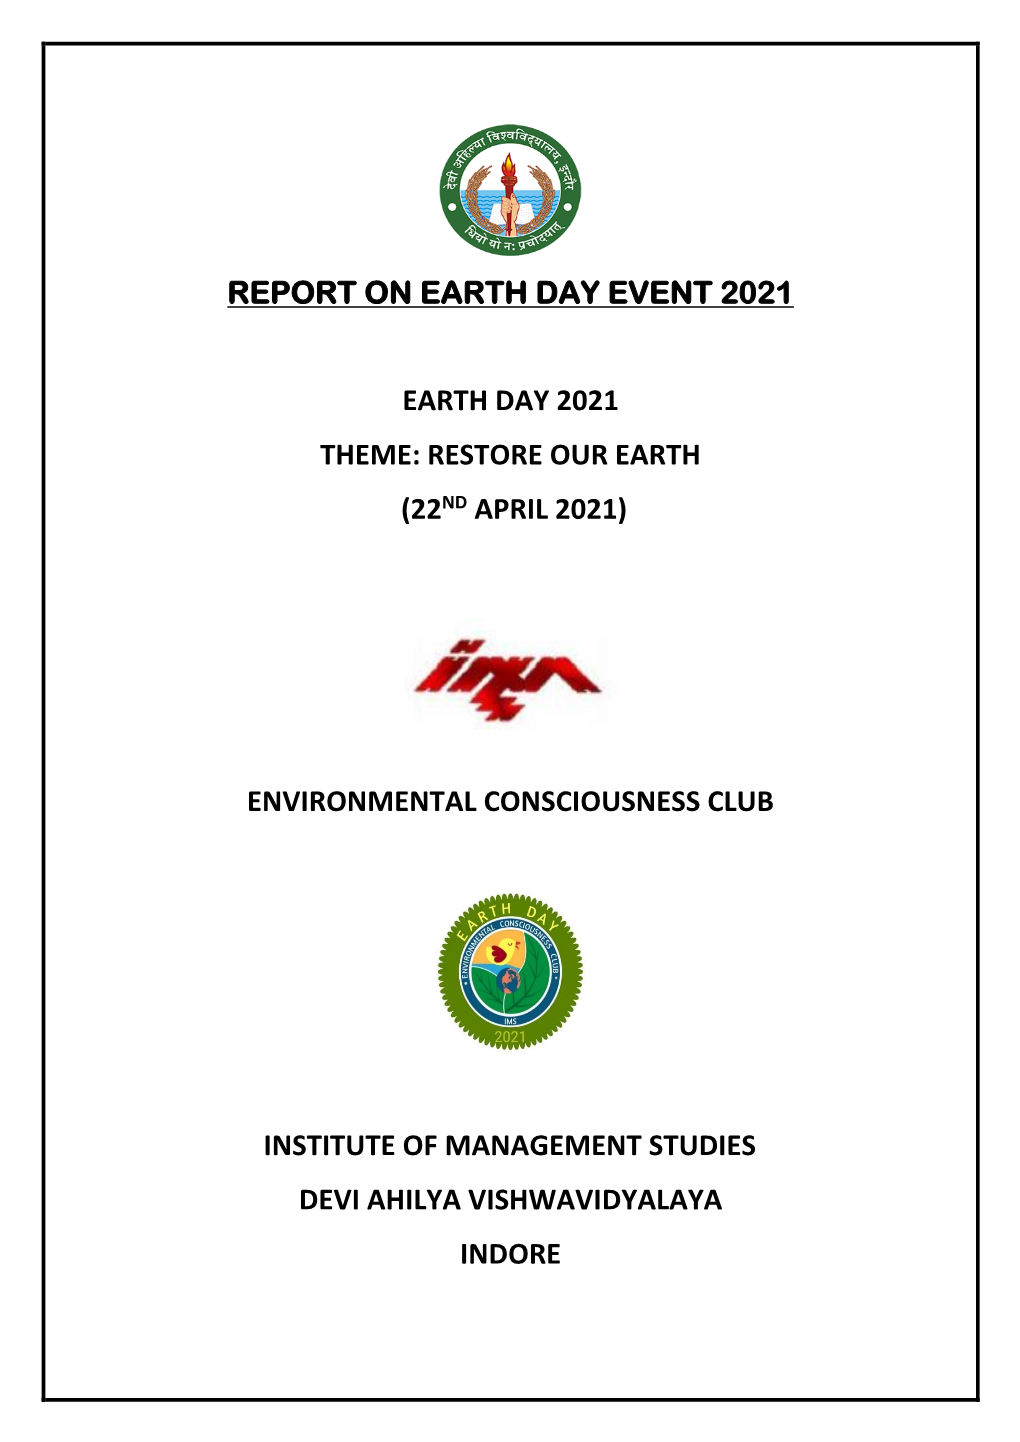 Report on Earth Day 2021